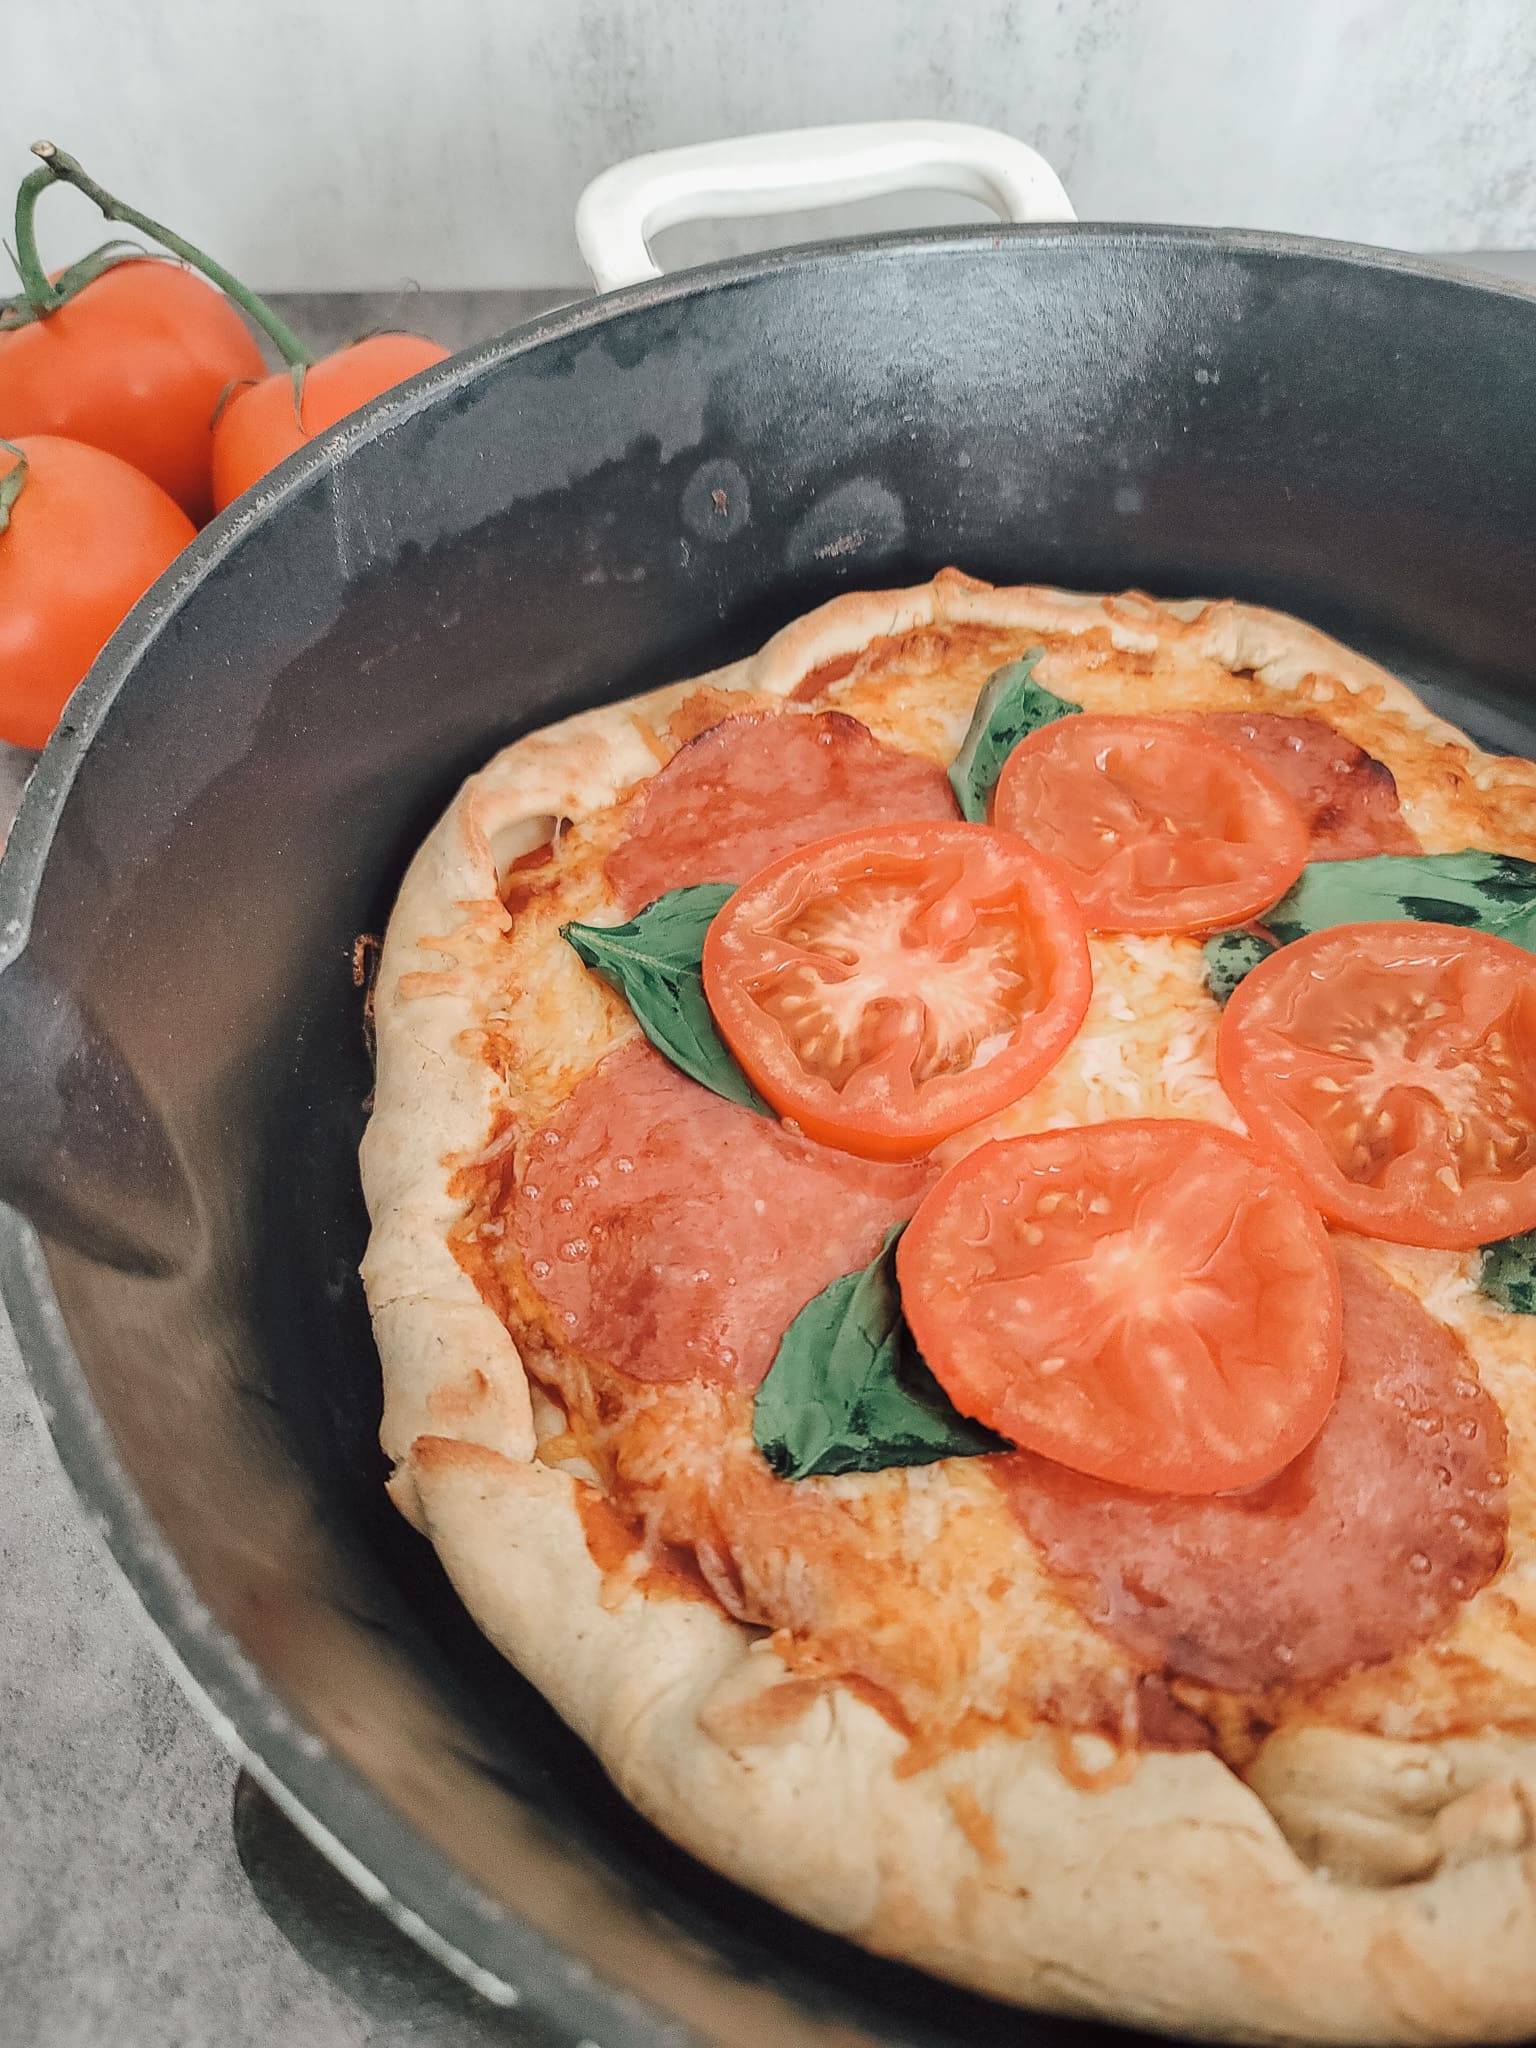 Einkorn pizza dough. Place back in the oven and cook an additional 10 minutes. You can remove the pizza from the cast iron pan with a spatula or serve right from the pan. 